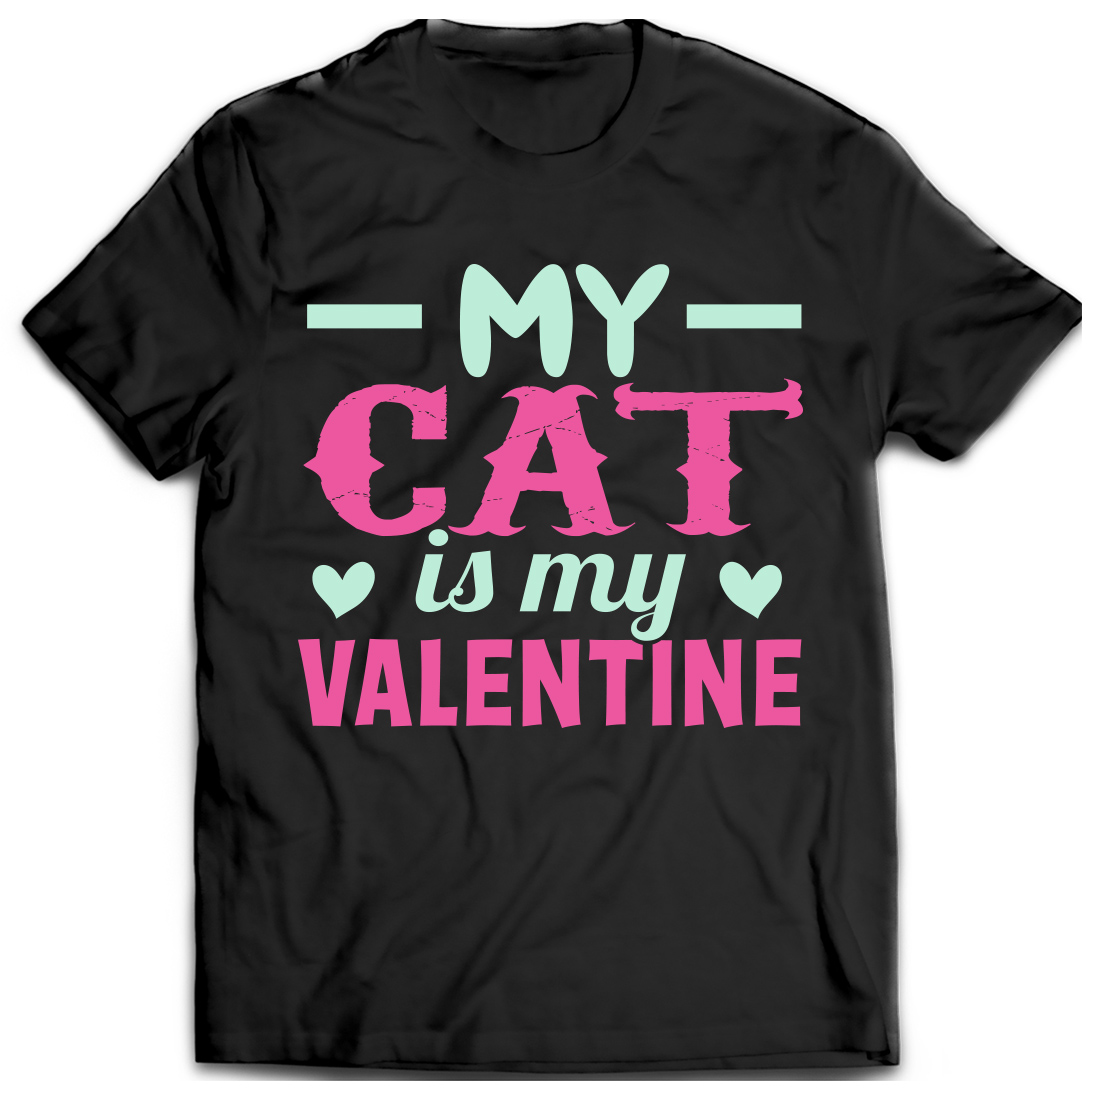 My Cat is My Valentine T-Shirt Design cover image.